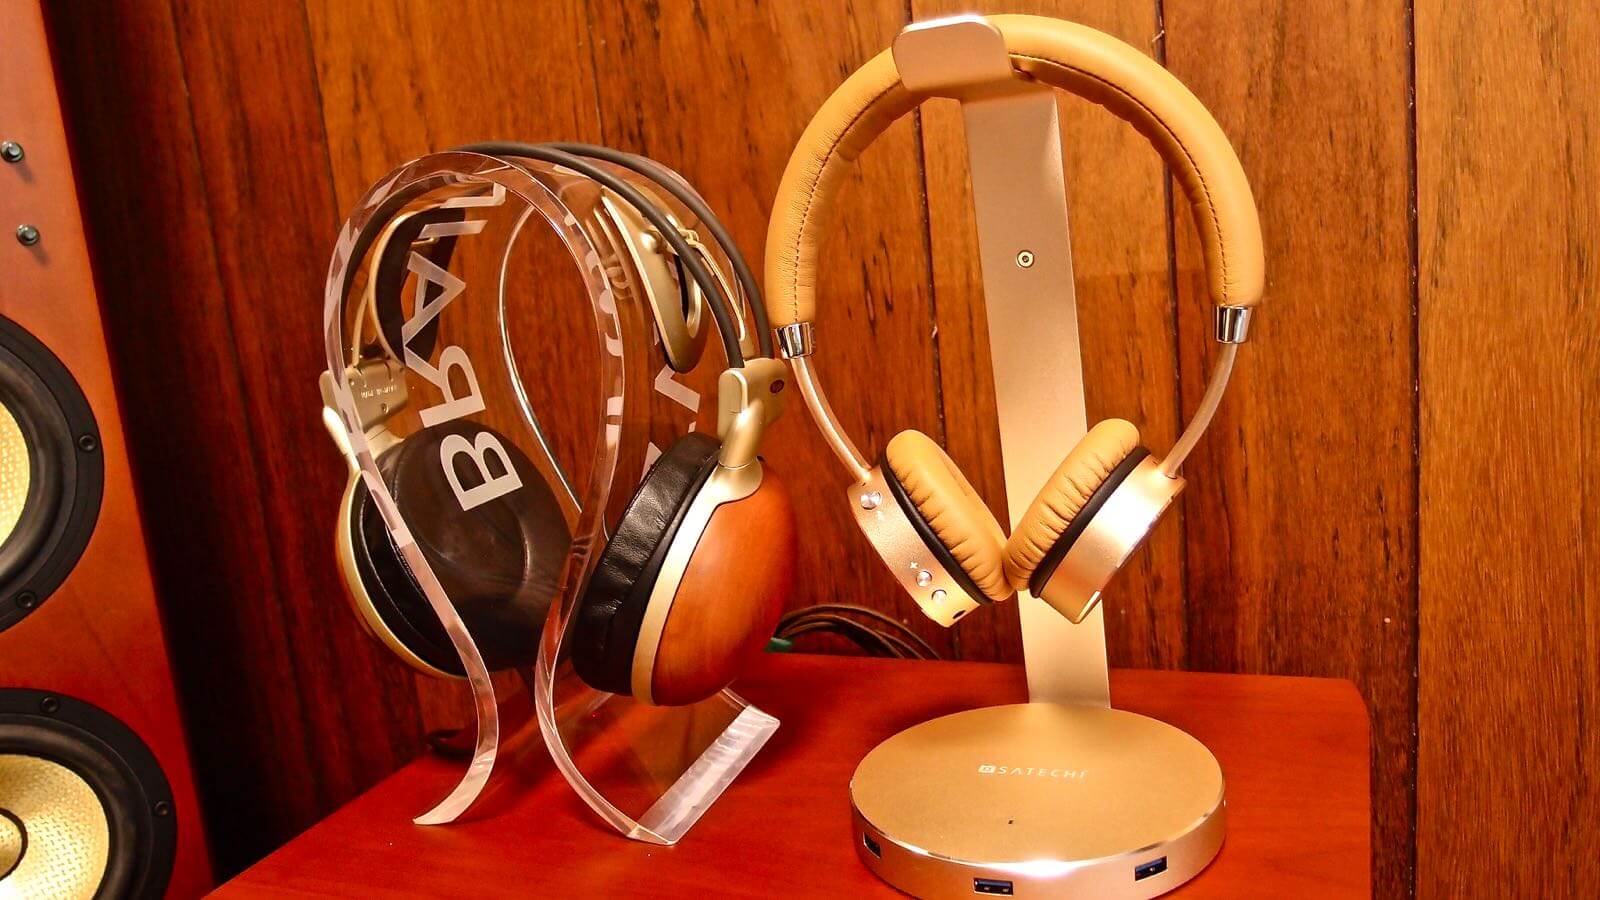 0160 Satechi s Headphone Stand Review 17